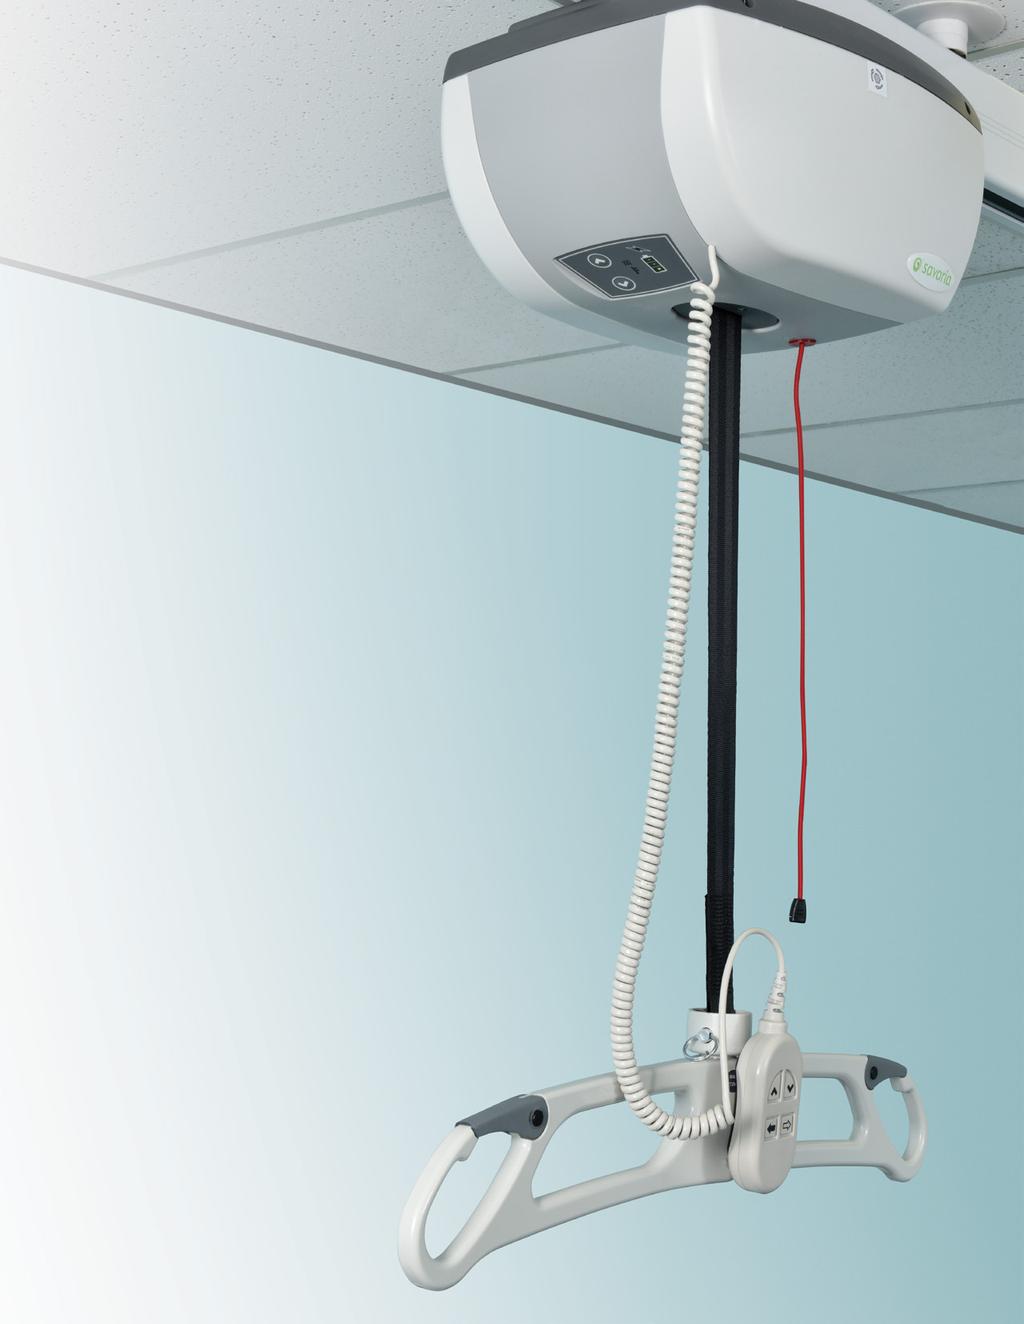 Keep it simple Anatomy of our ceiling lifts Easy to service From installation to preventative inspections or a service need, the ultra-lightweight design makes everything easier and faster.